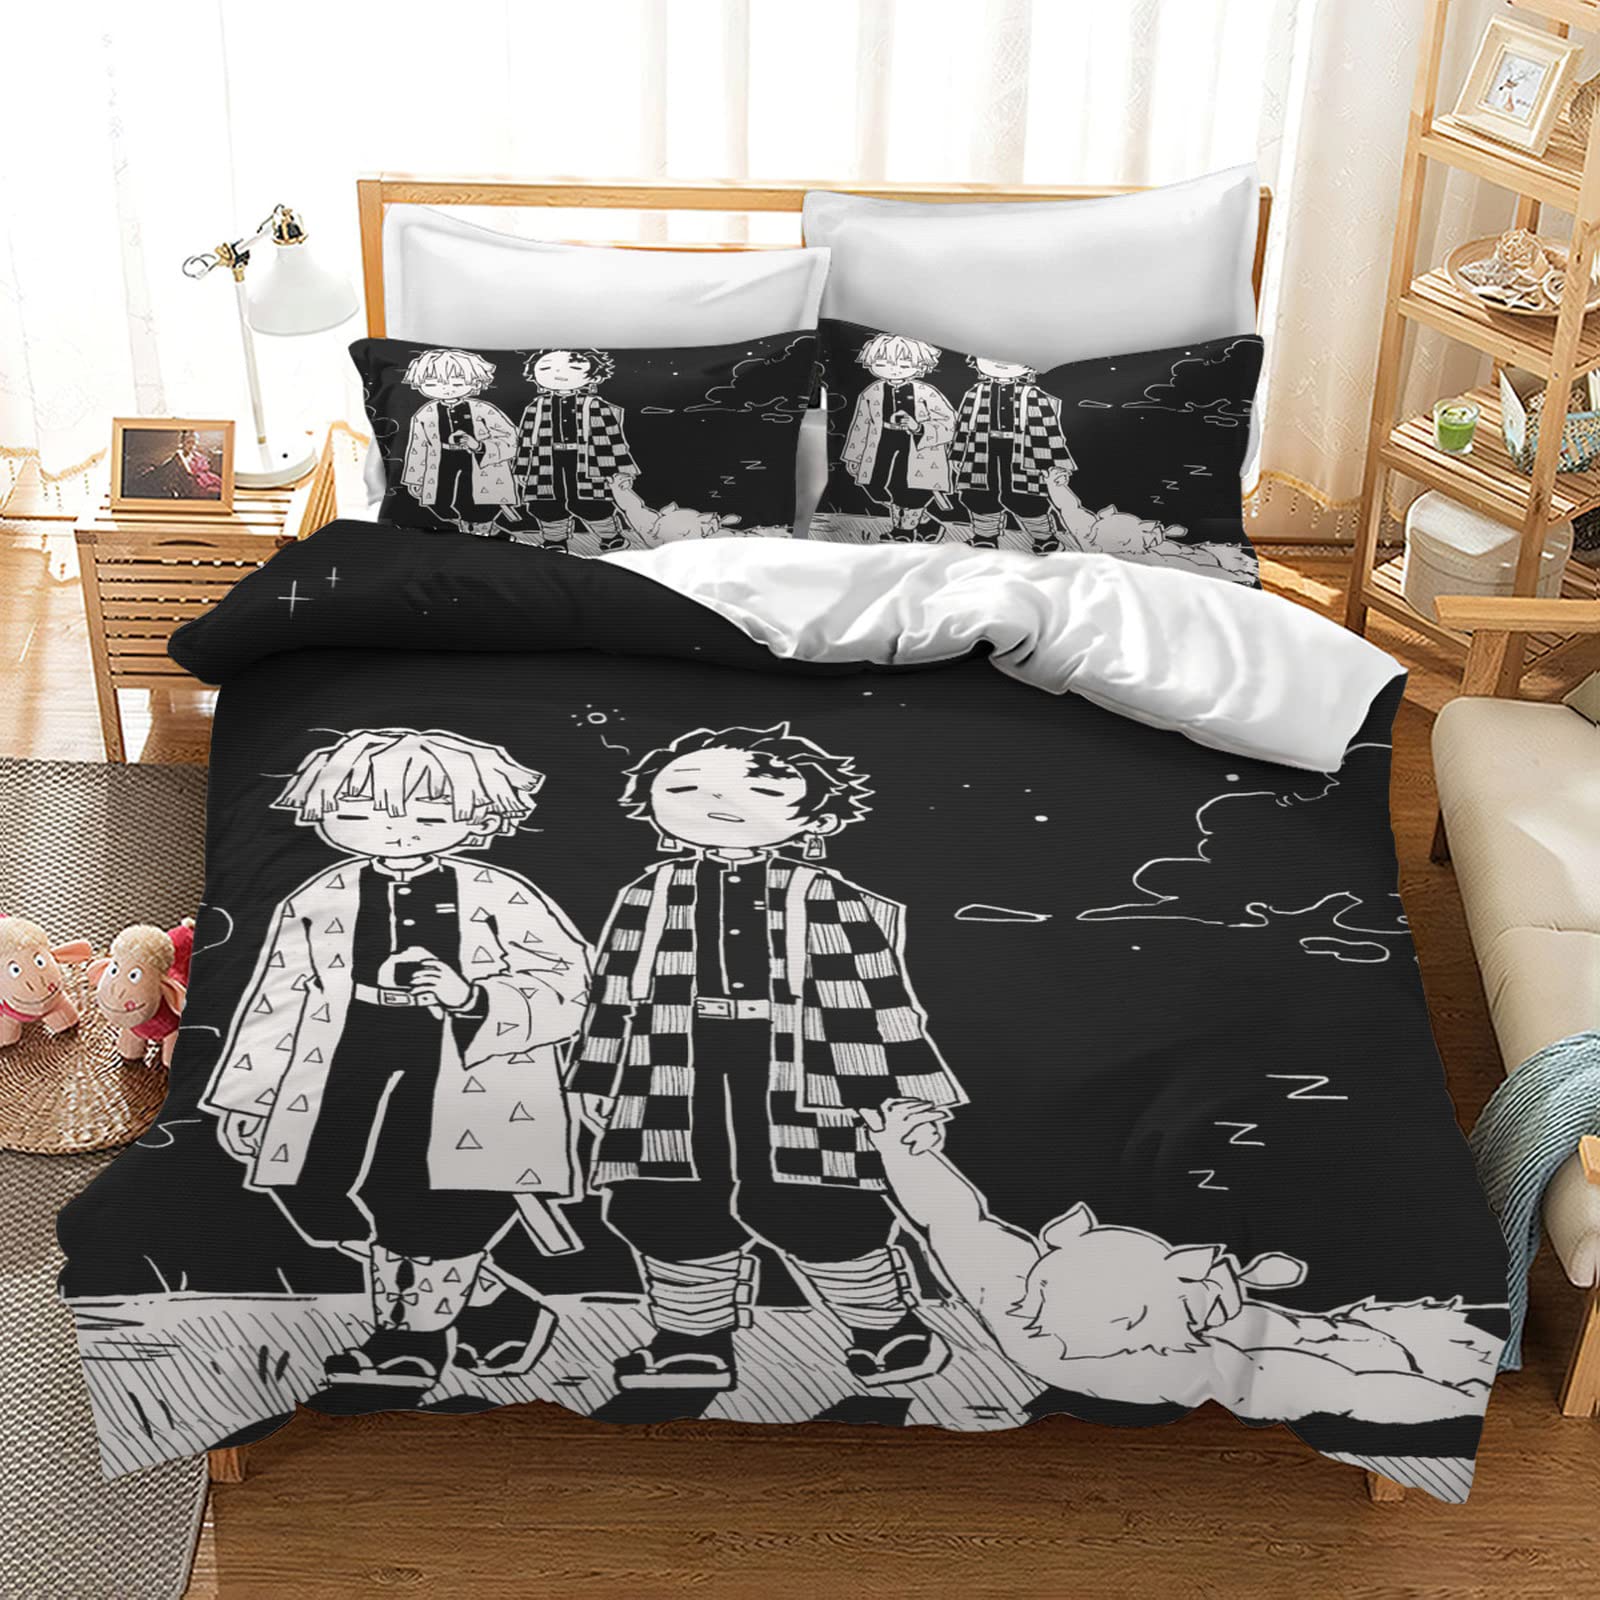 Super King) 3D Fate Stay Night 1 Anime Bed Pillowcases Quilt on OnBuy